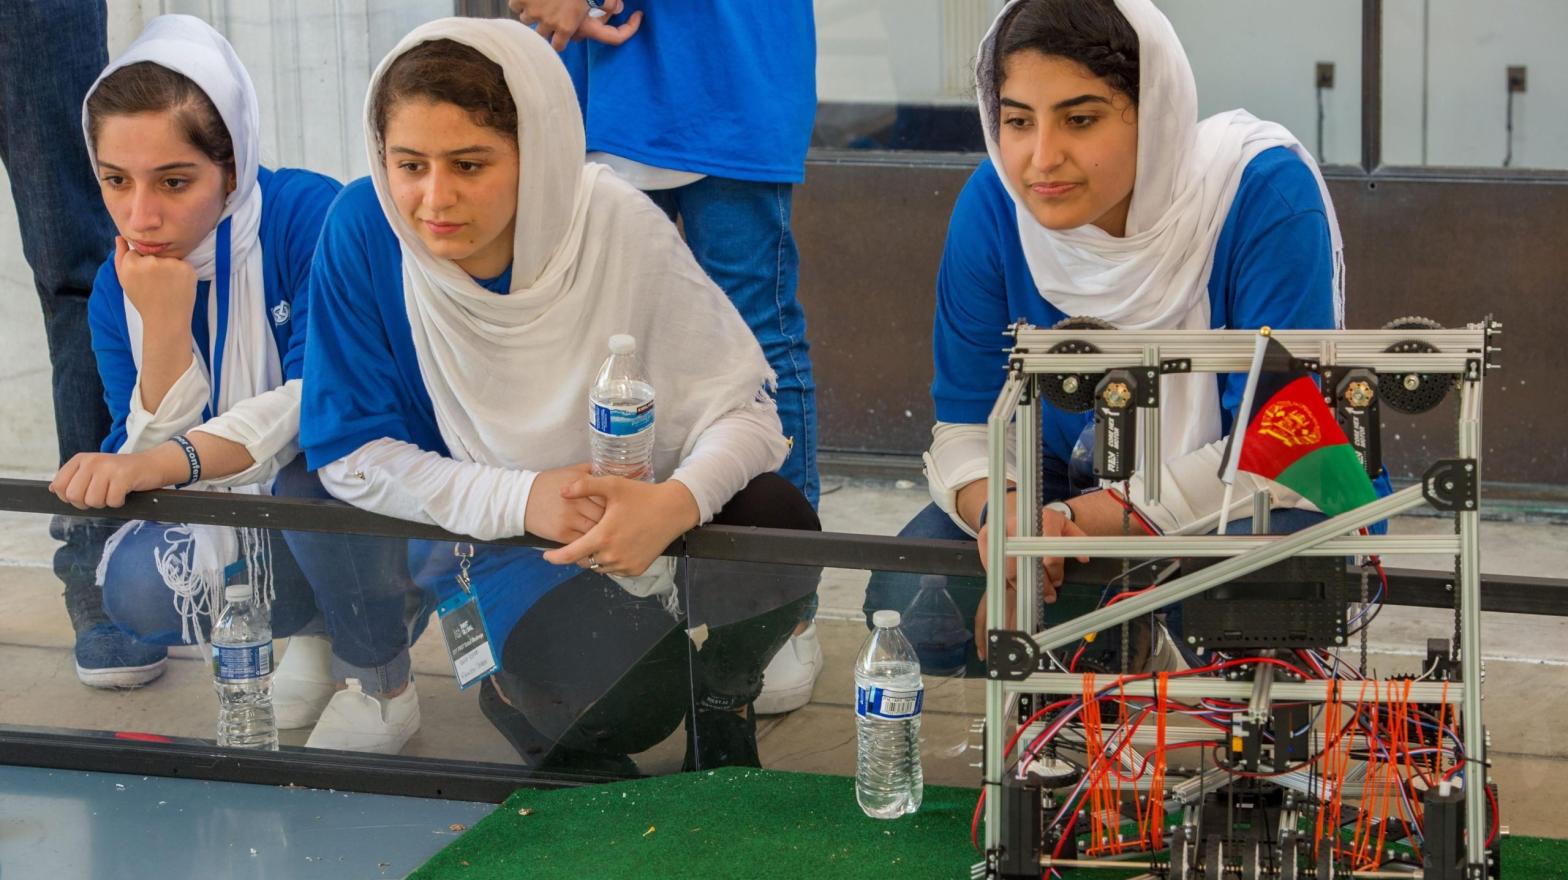 Members of the Afghan all-girls robotics team, with their robot nearby, watch the robots of other countries in the practice area on July 17, 2017 in Washington, D.C.  (Photo: Paul J. Richards/AFP, Getty Images)